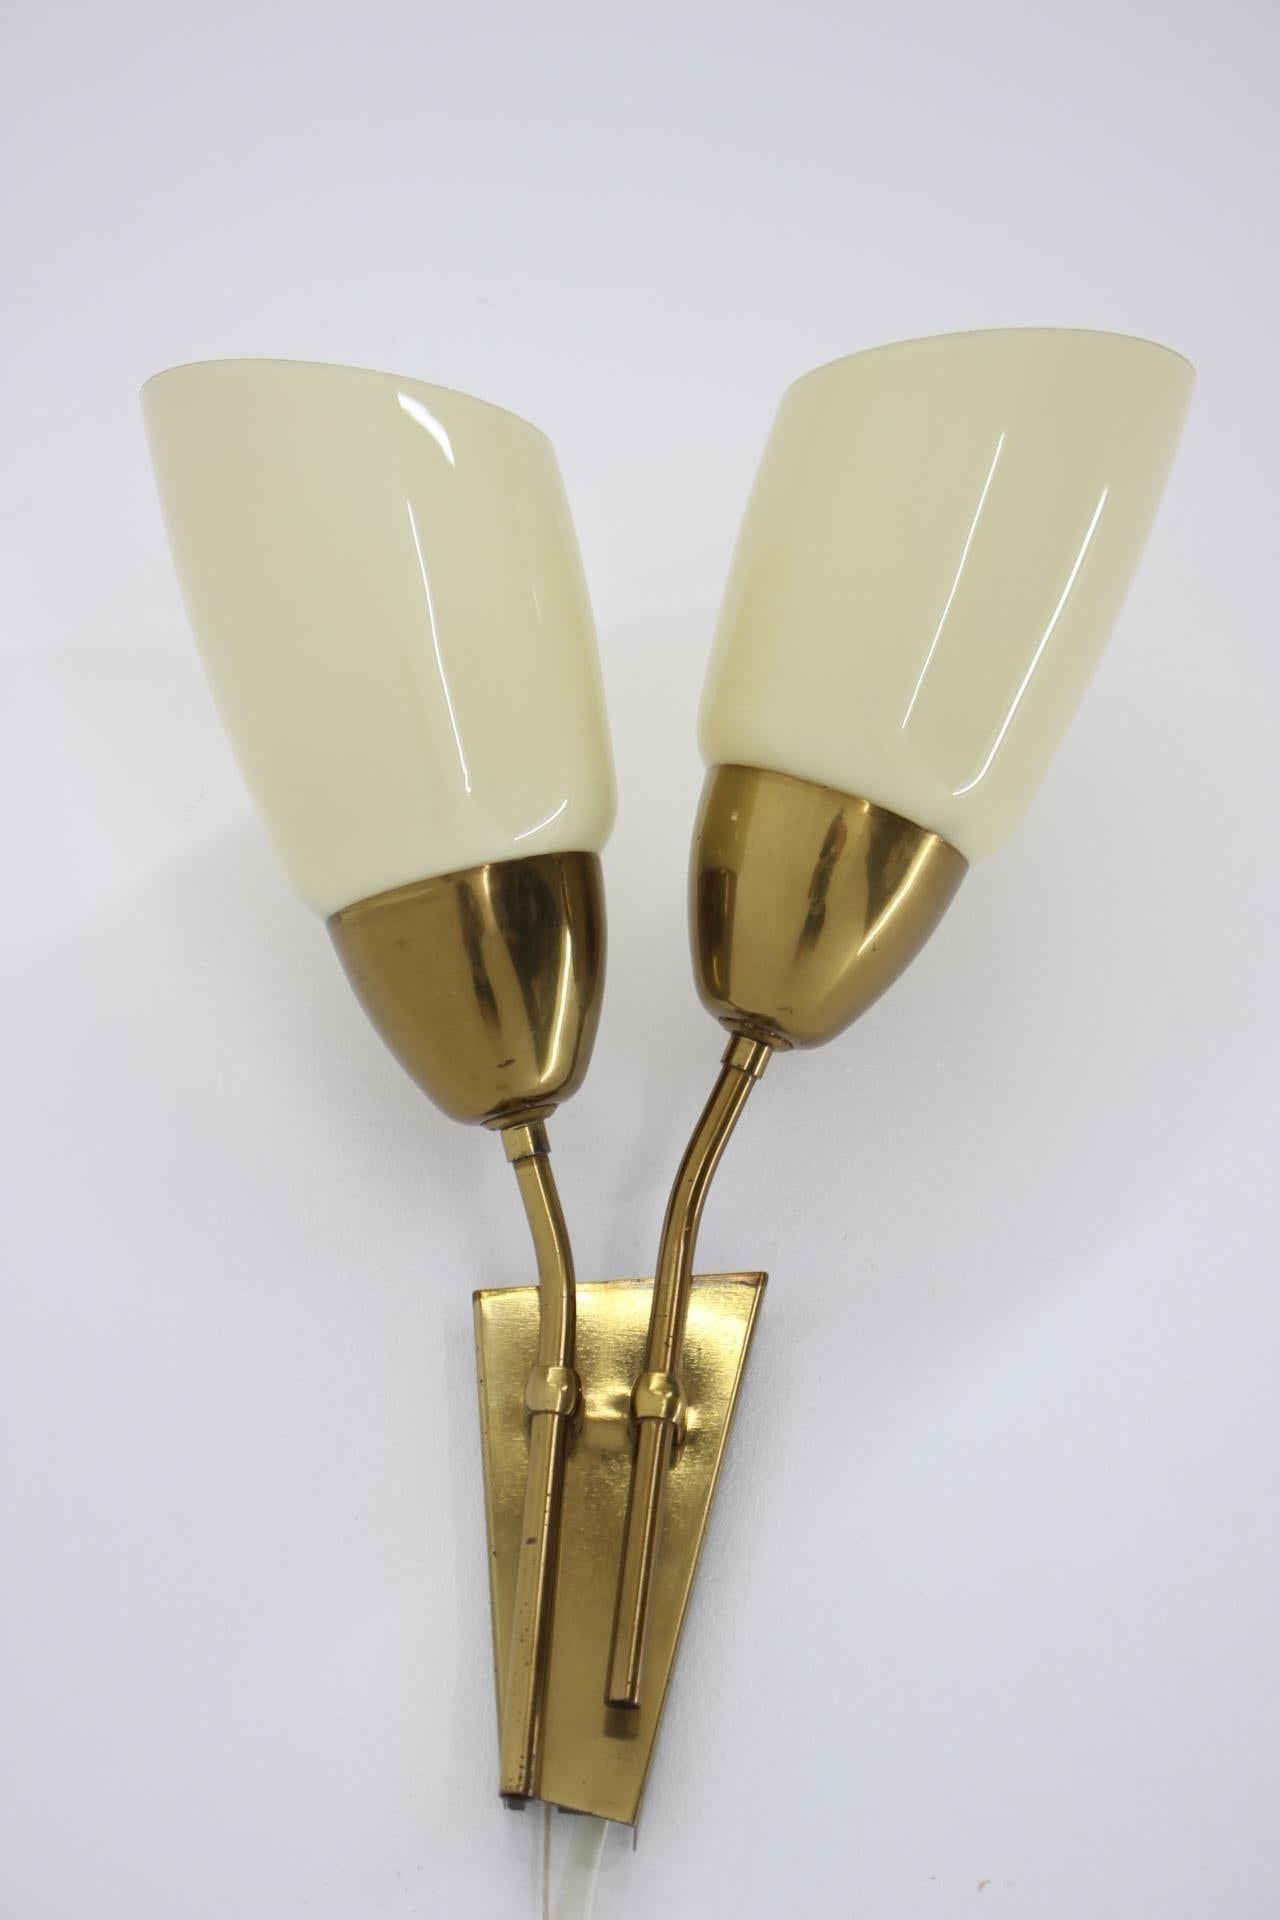 Midcentury Brass Wall Lamp by Kamenicky Senov, 1970s, more pieces available In Good Condition For Sale In Praha, CZ